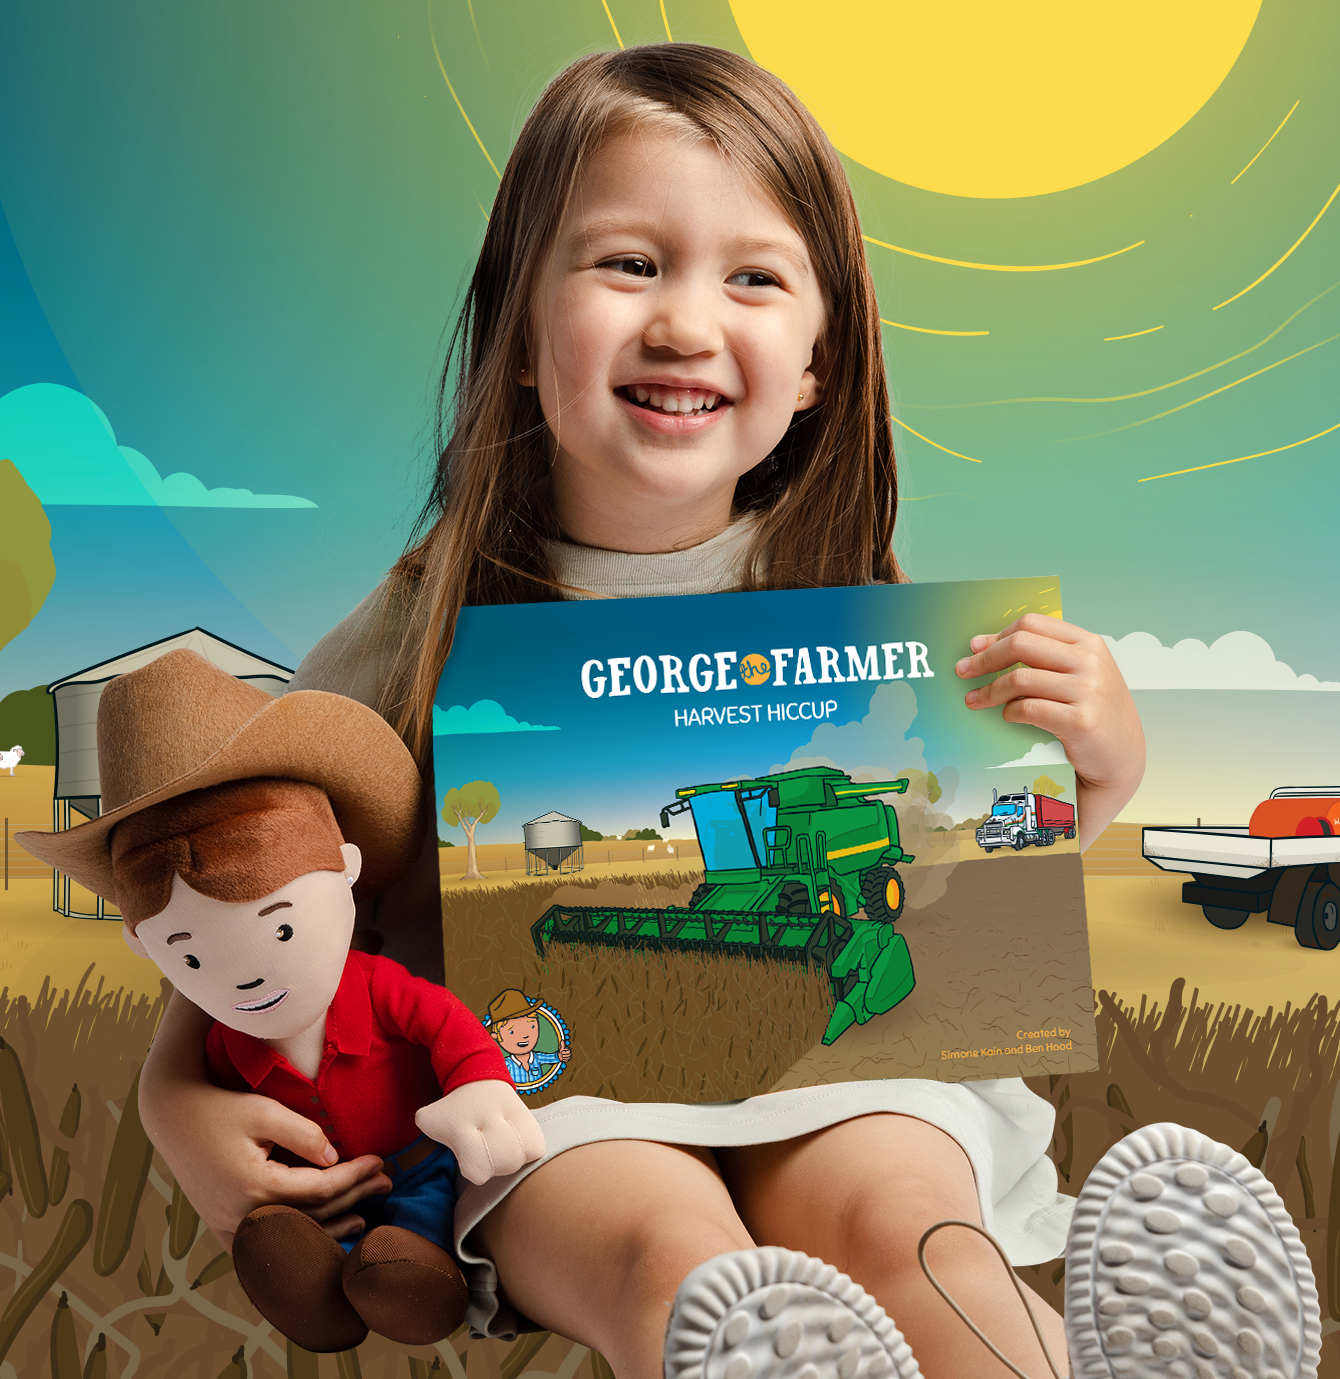 George the Farmer Harvest Hiccup Picture Book